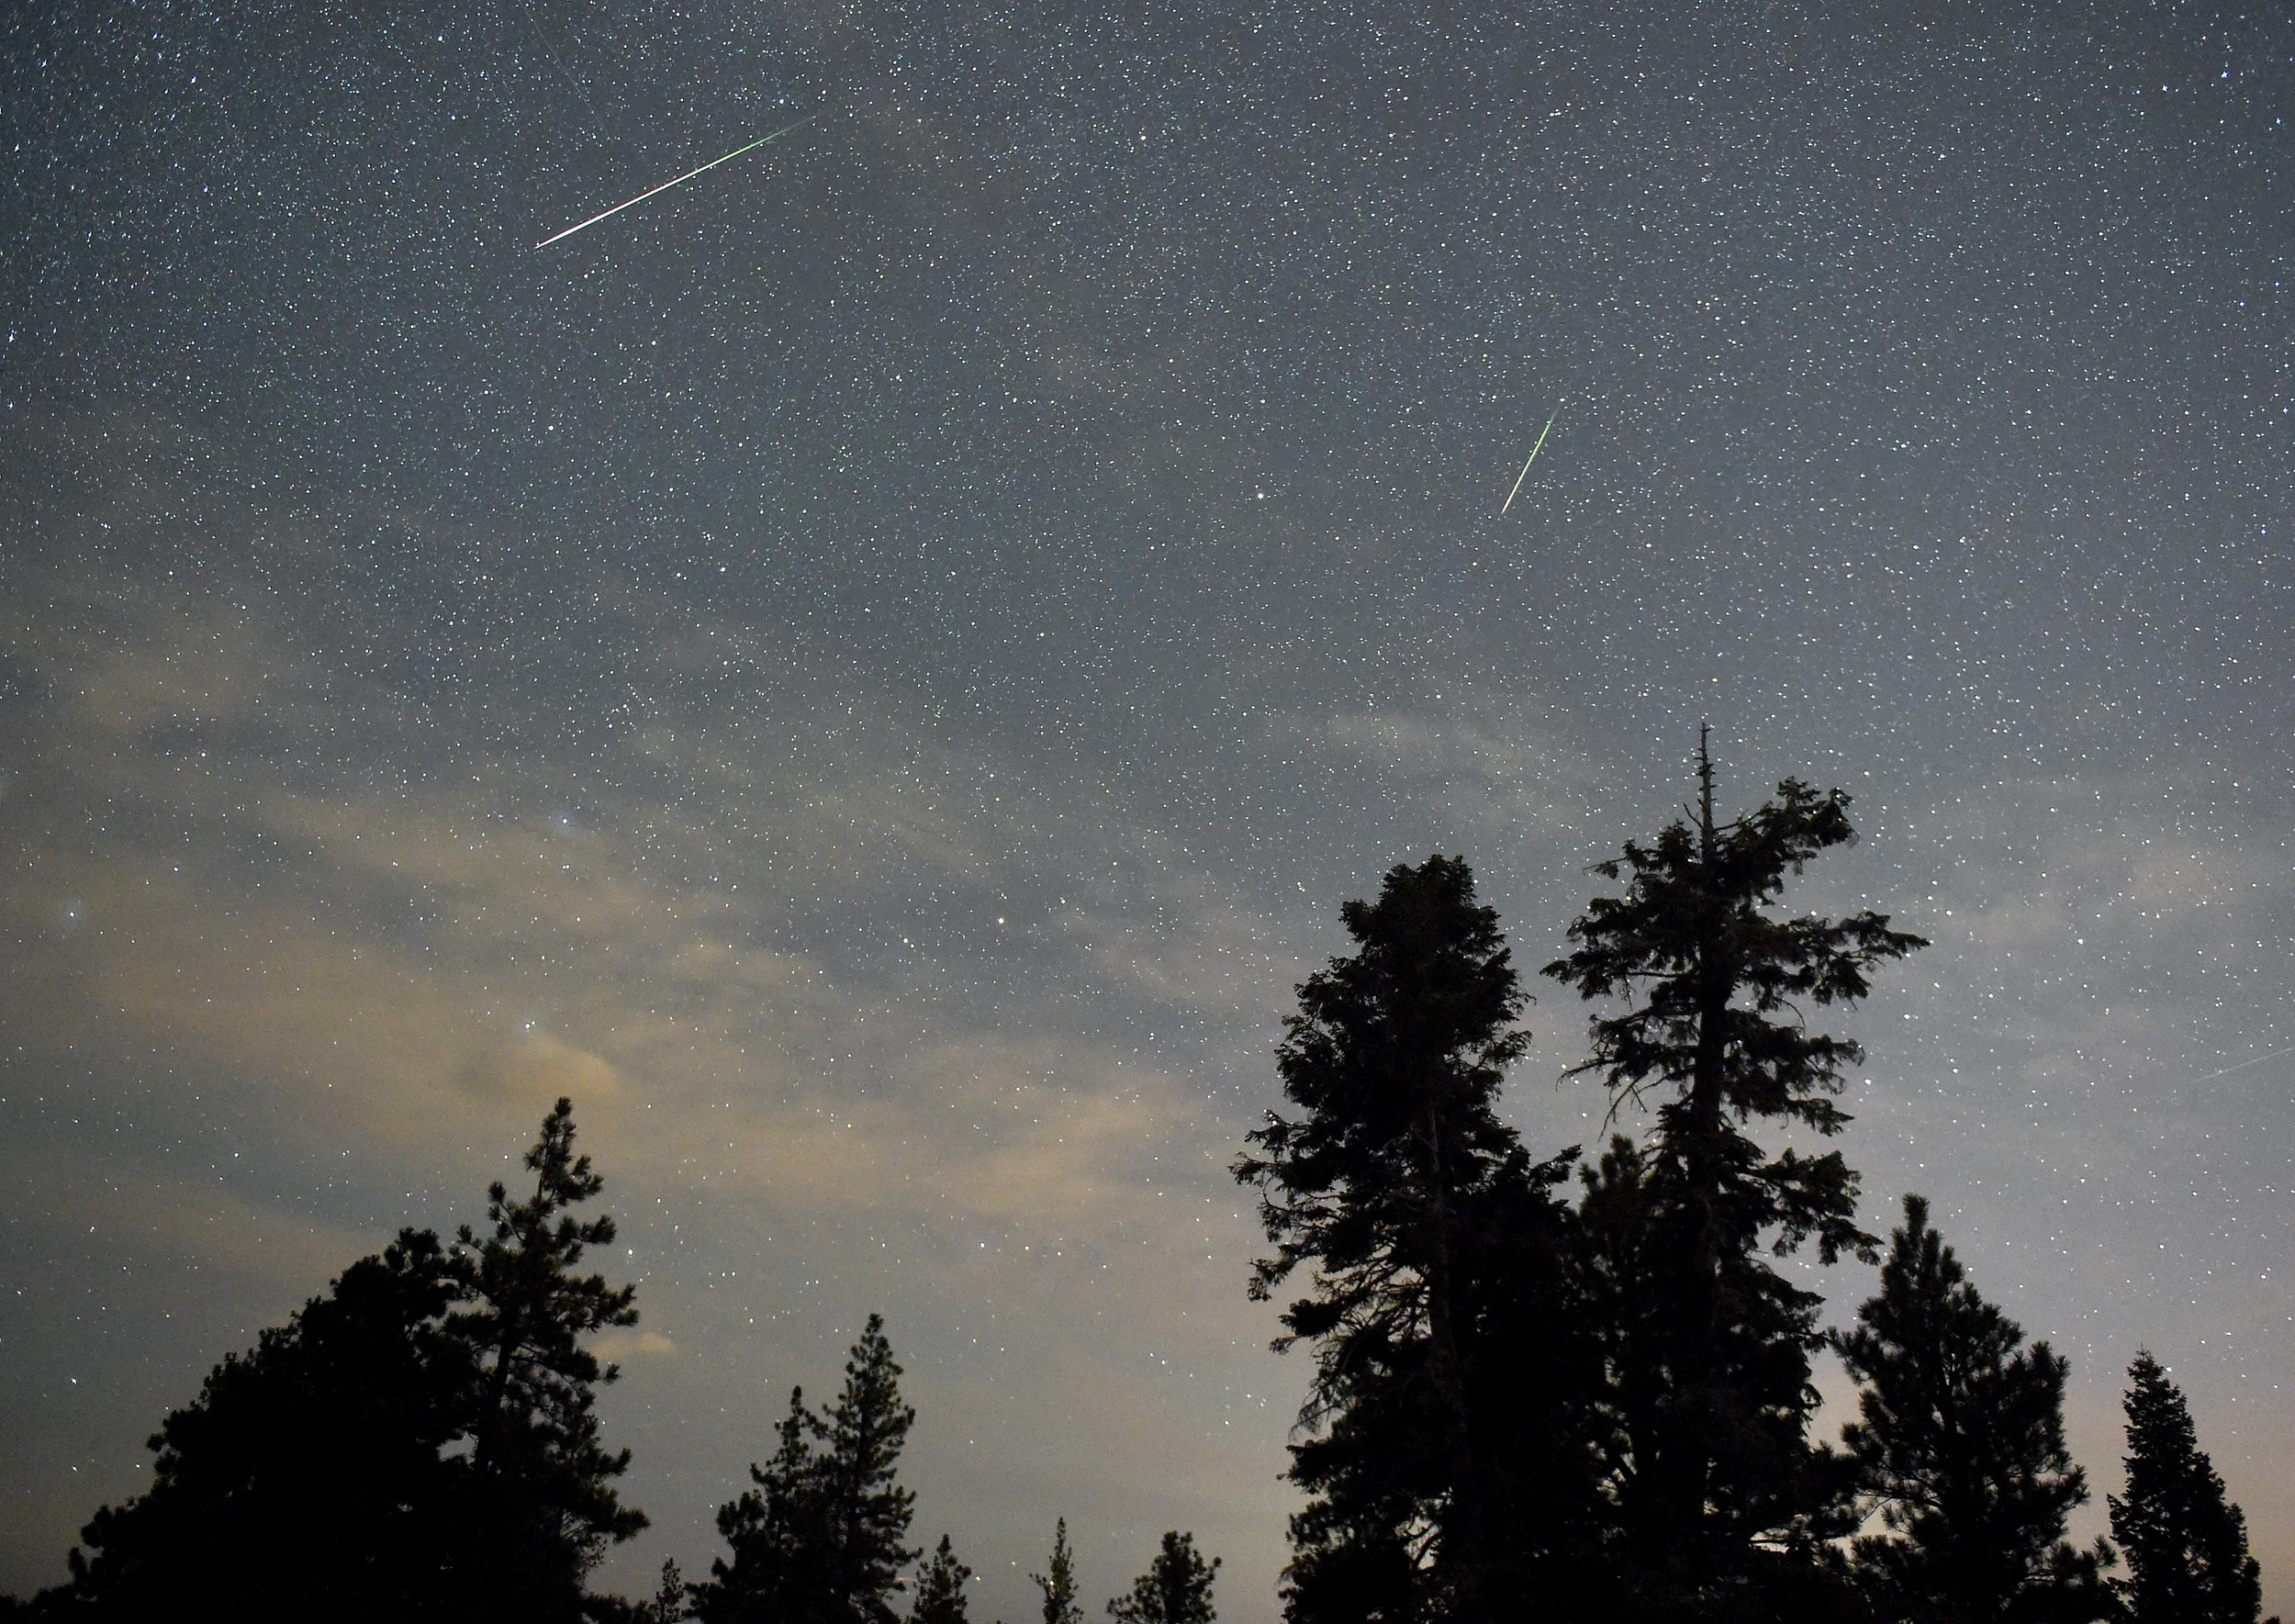 Best Places to See the Perseid Meteor Shower in Michigan